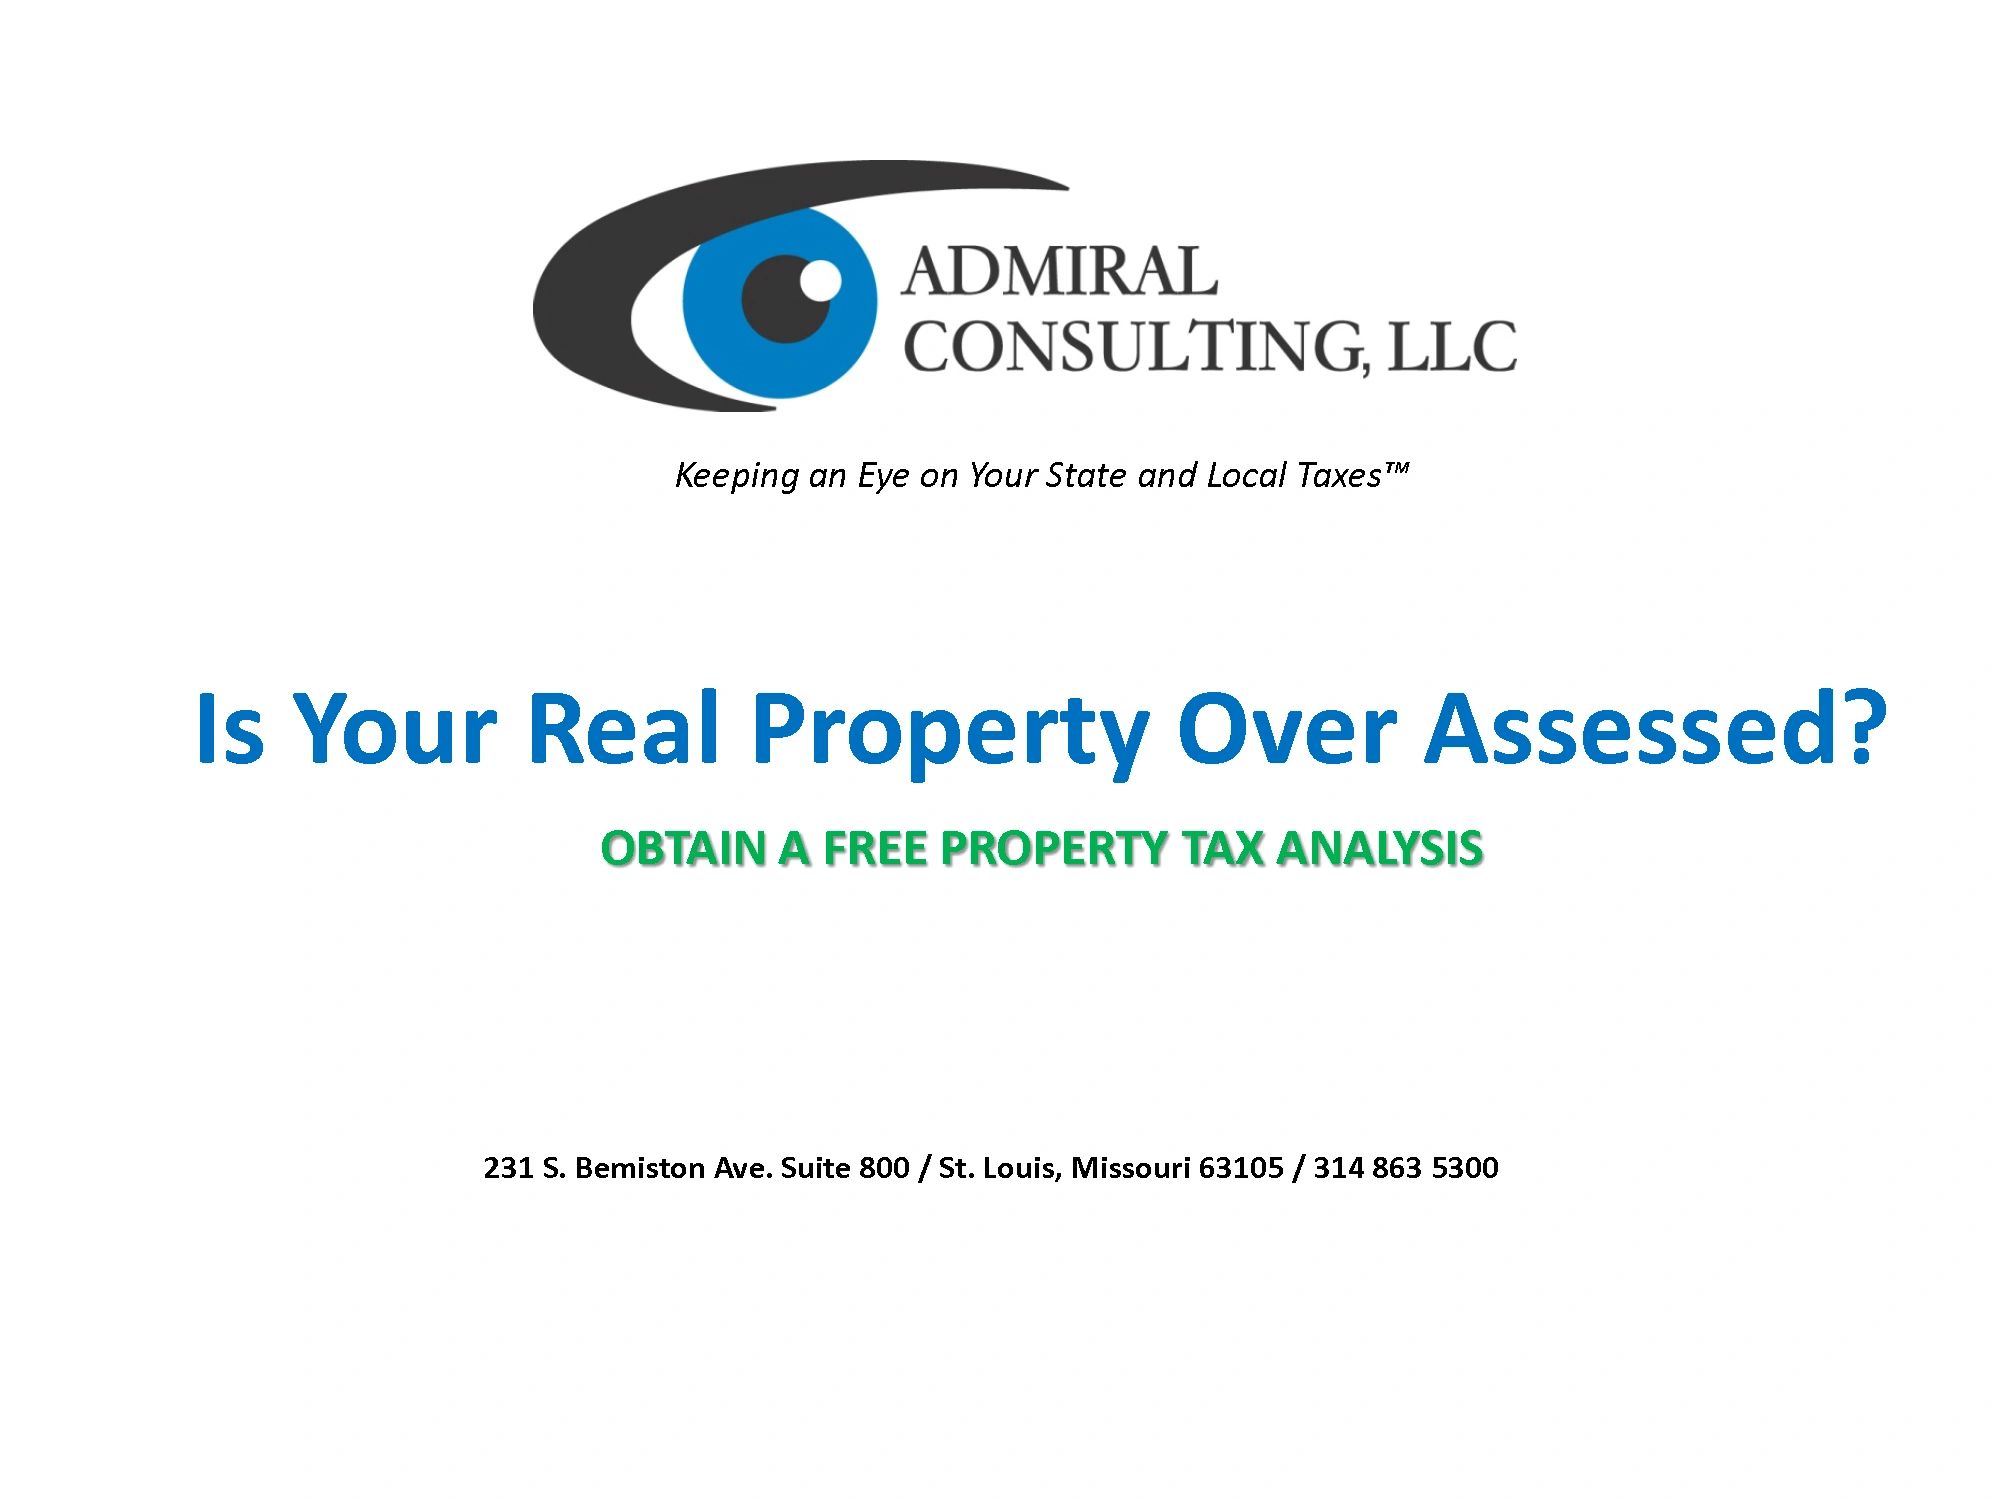 recover-overpaid-property-taxes-admiral-consulting